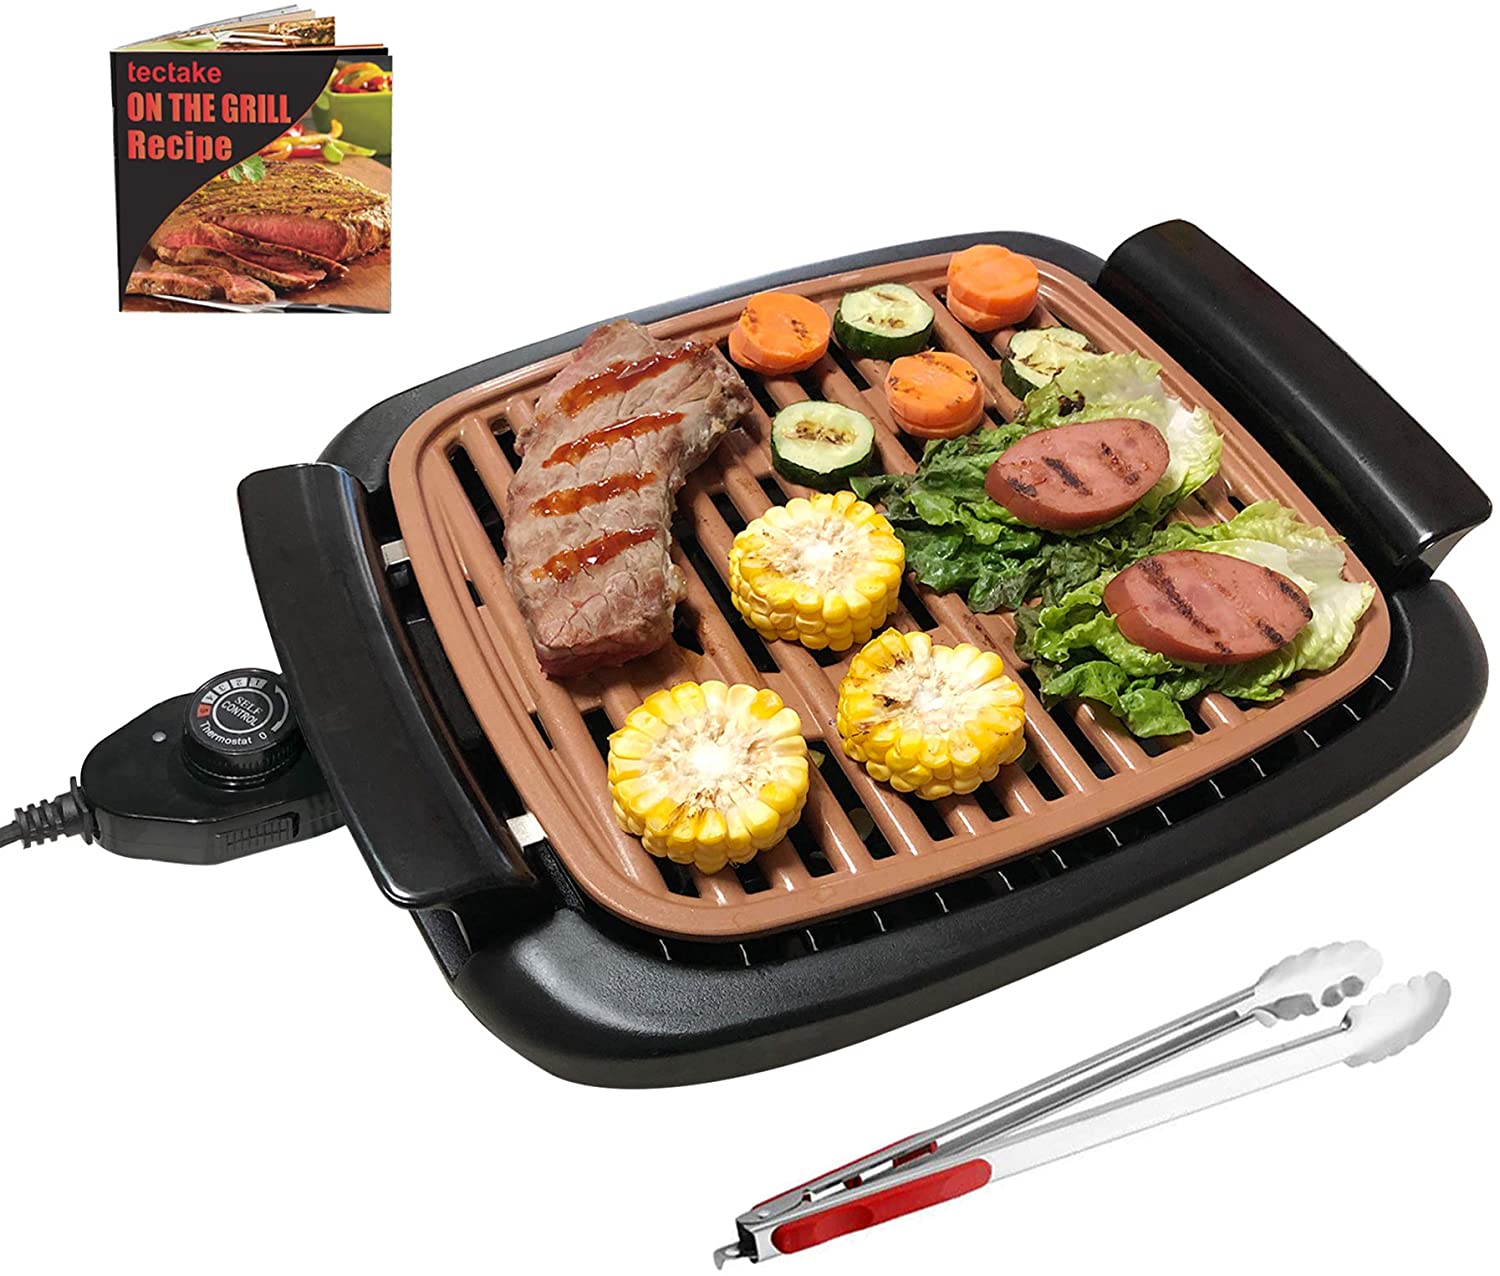 Nonstick Electric Indoor Smokeless Grill - Portable BBQ Grills with Recipes, Fast Heating, Adjustable Thermostat, Easy to Clean, 16" x 11" Tabletop Square Griddle with Oil Drip Pan